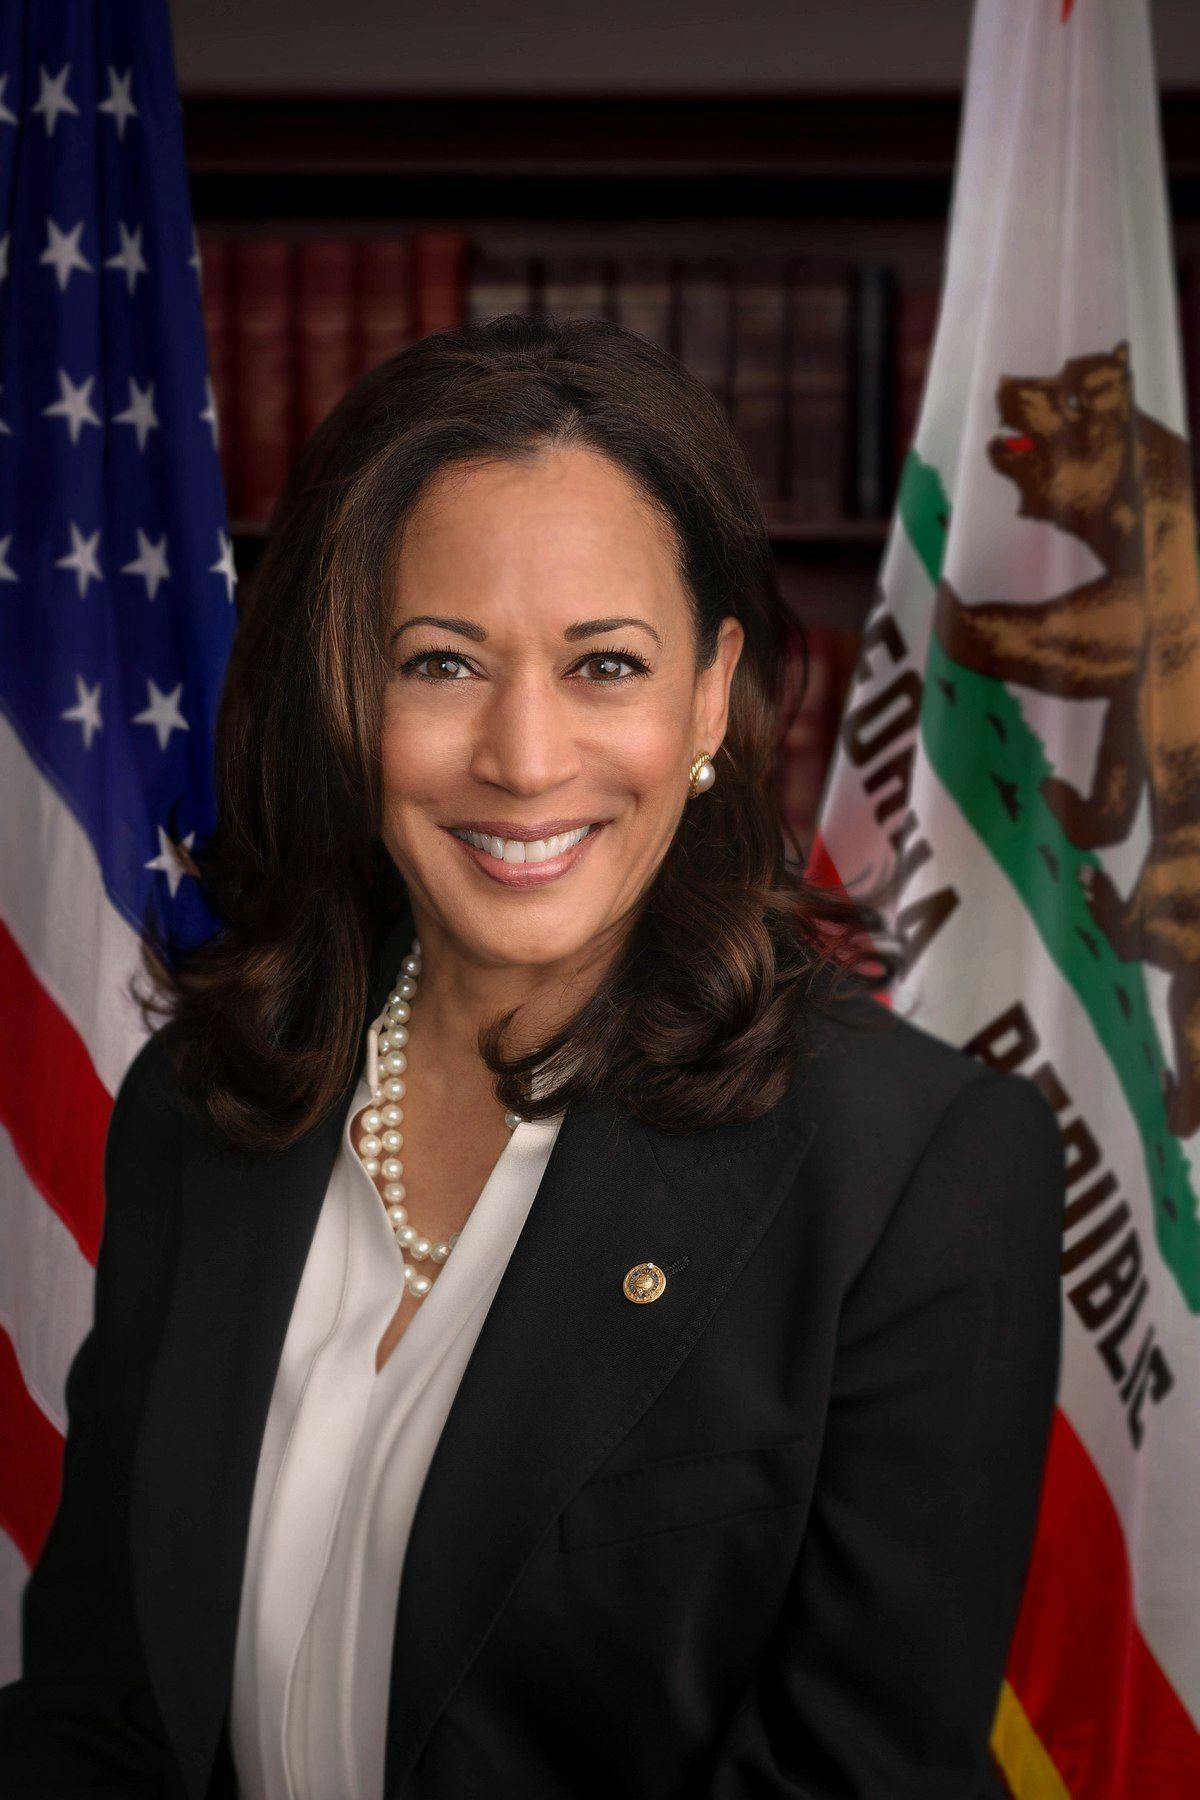 As a Presidential Candidate, Kamala Harris Had Difficulty Navigating Healthcare Issues